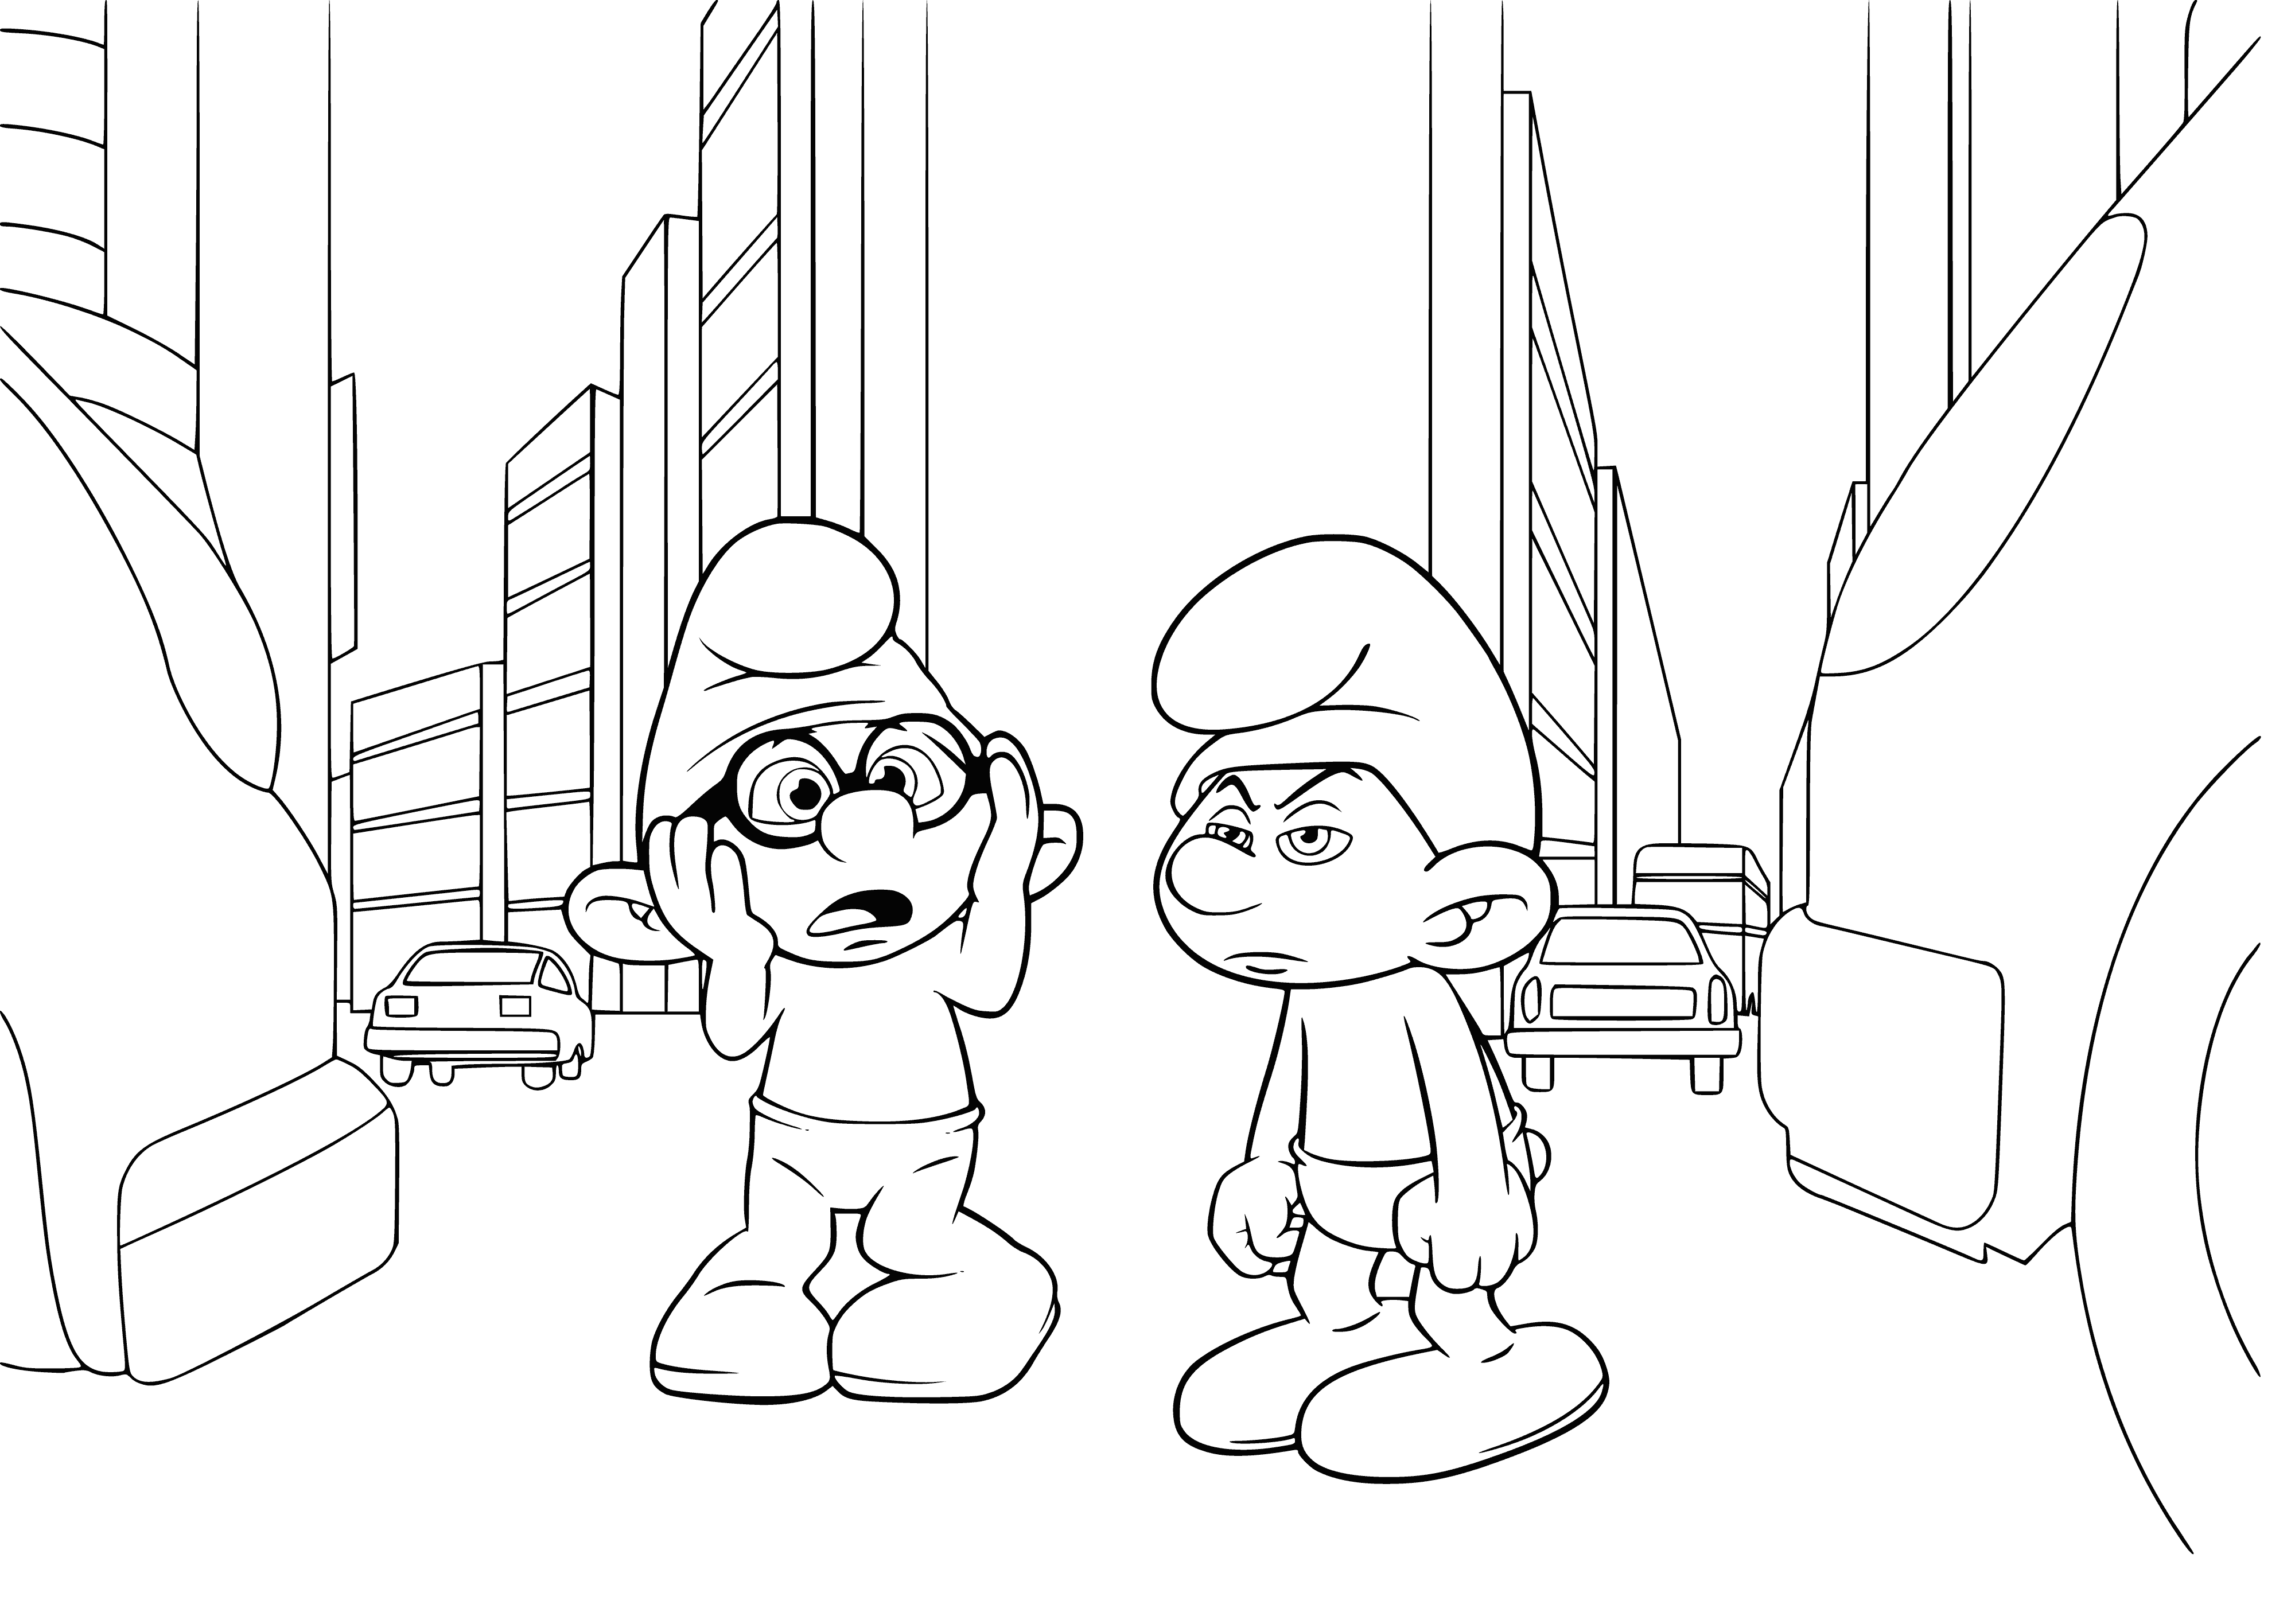 coloring page: Smurf Grumpy & Smurf Prudent: two blue Smurfs, crossed arms & same green leaves, one has stern look, other has disgruntled.